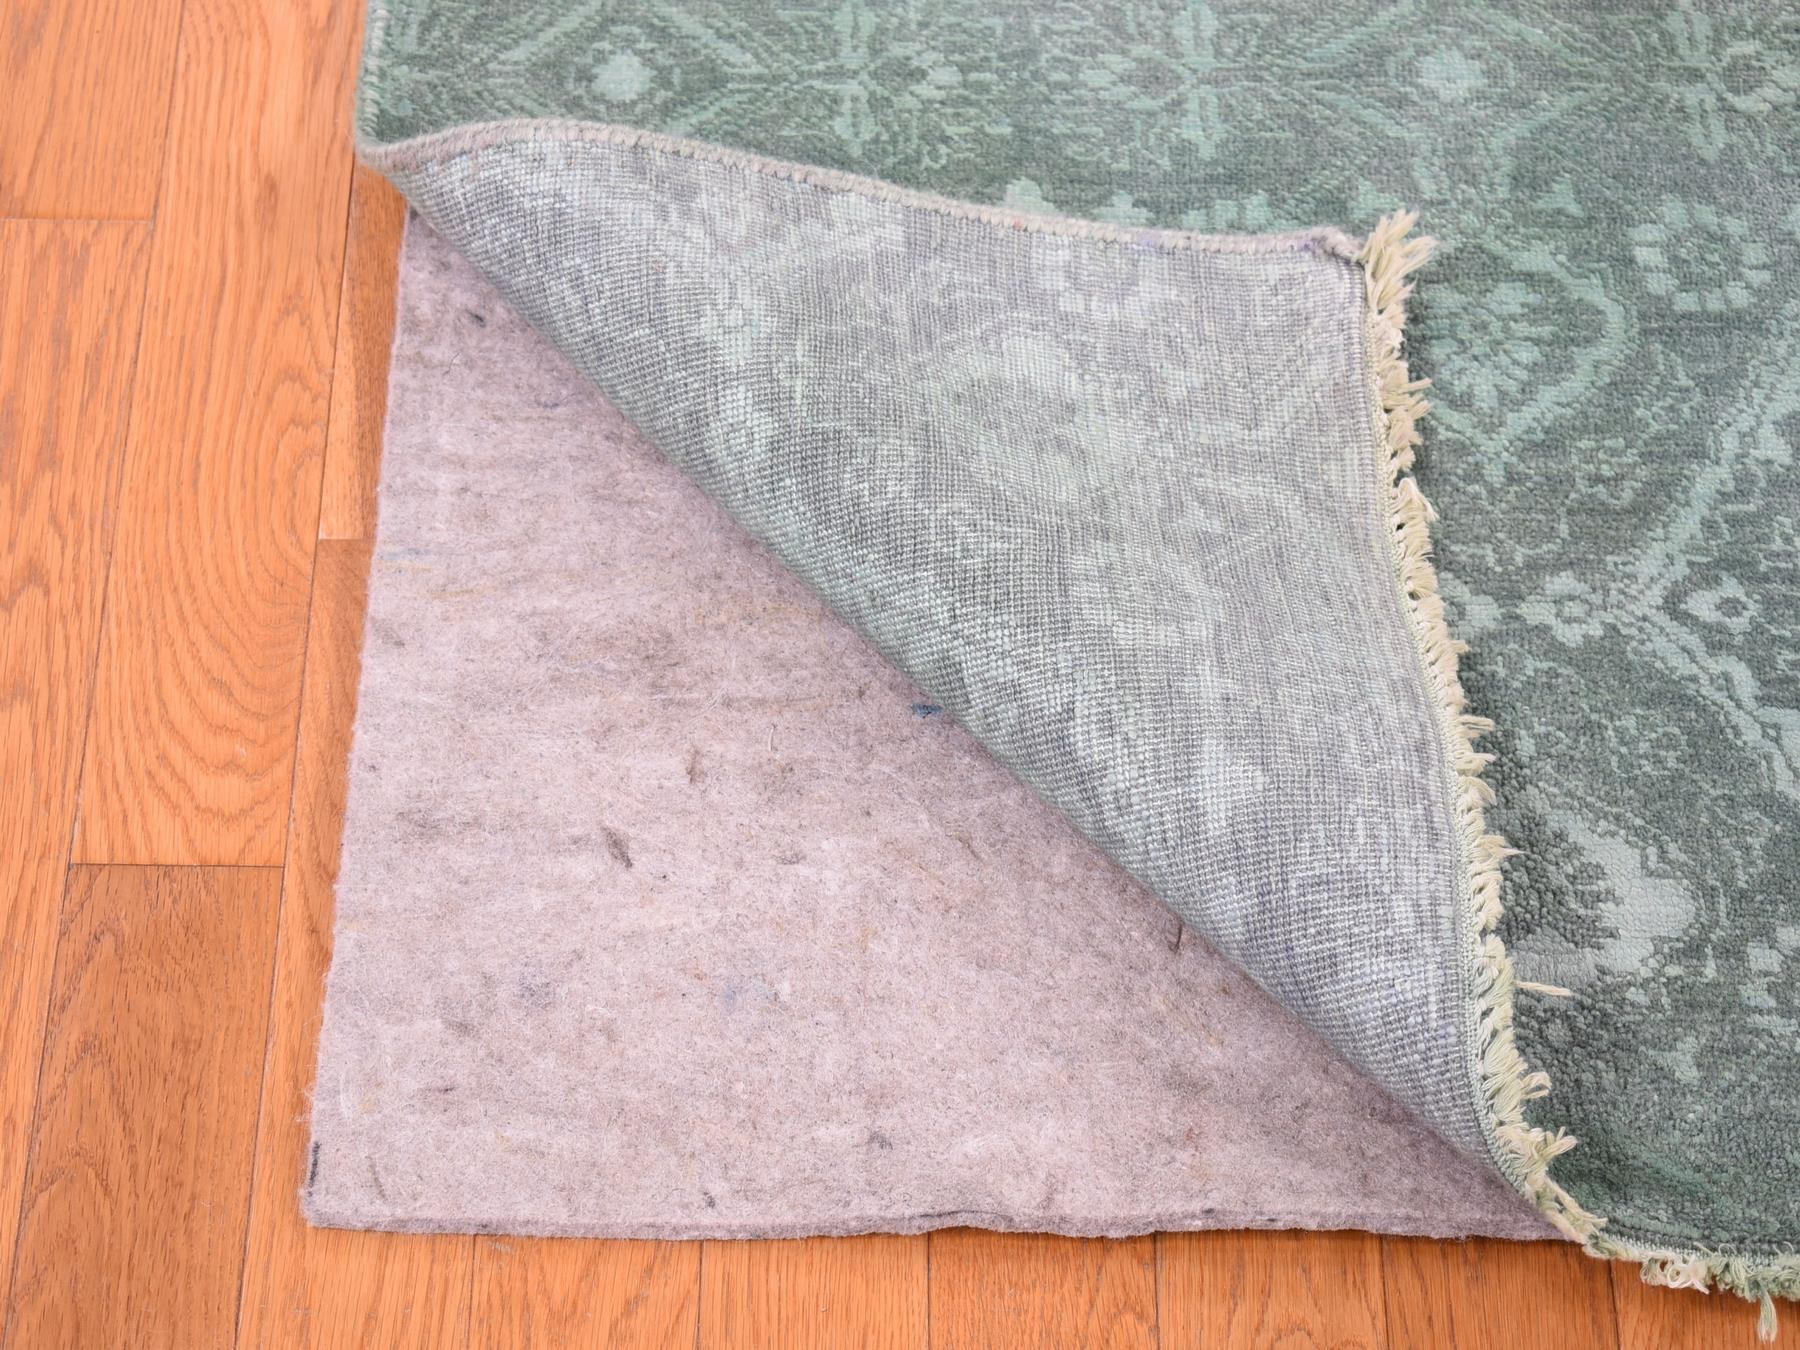 TransitionalRugs ORC726093